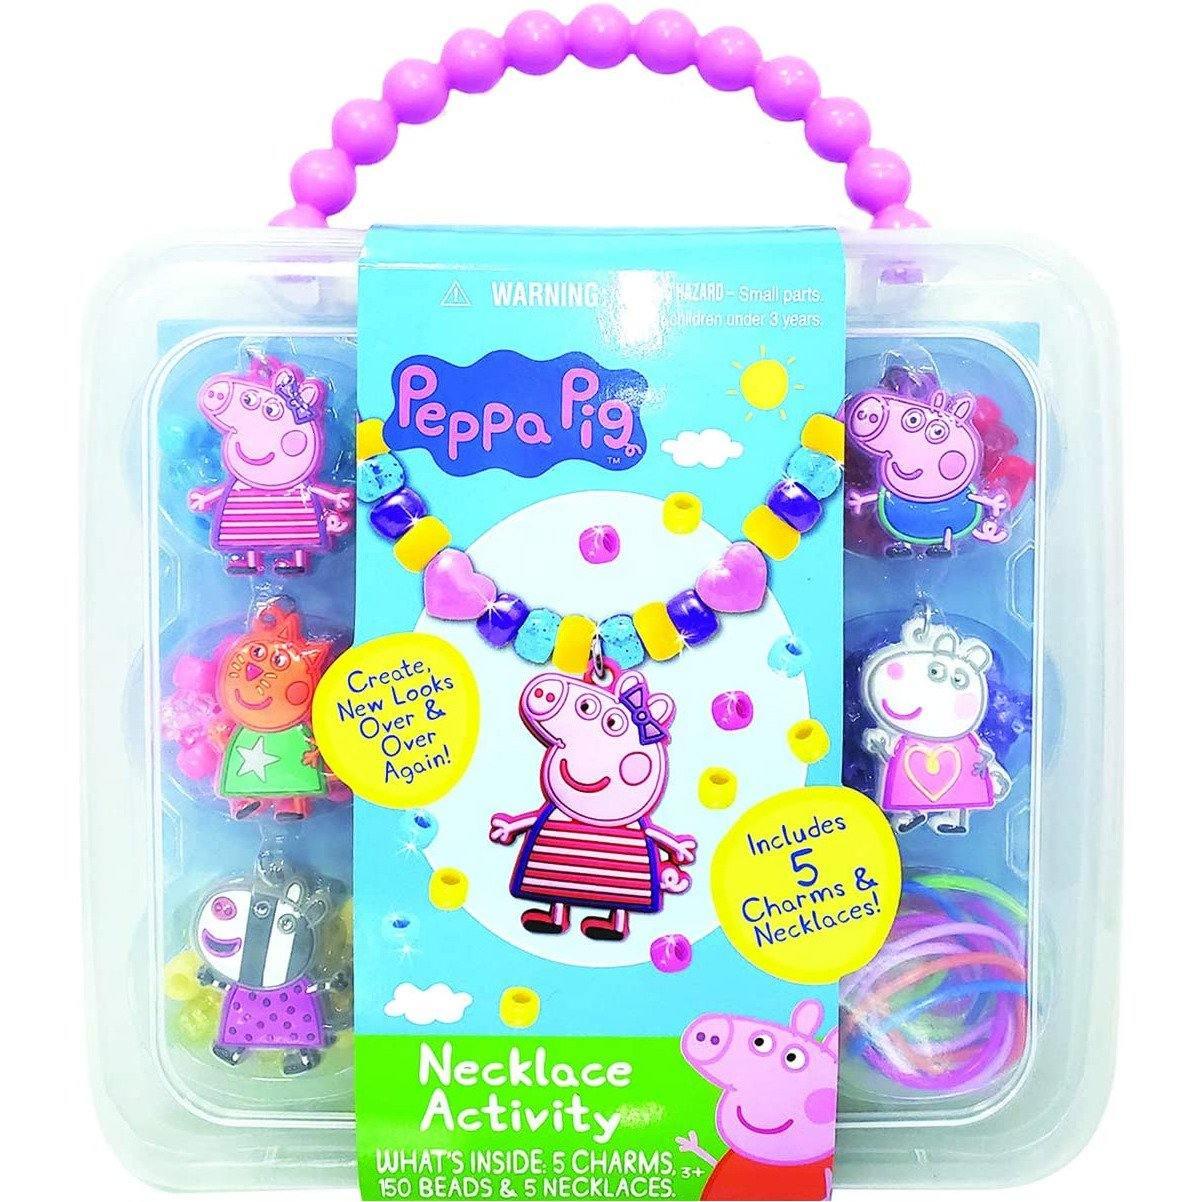 Tara Toys 95484 Peppa Pig Necklace Activity Set - BumbleToys - 5-7 Years, Girls, Make & Create, Necklace Set, OXE, Peppa Pig, Pre-Order